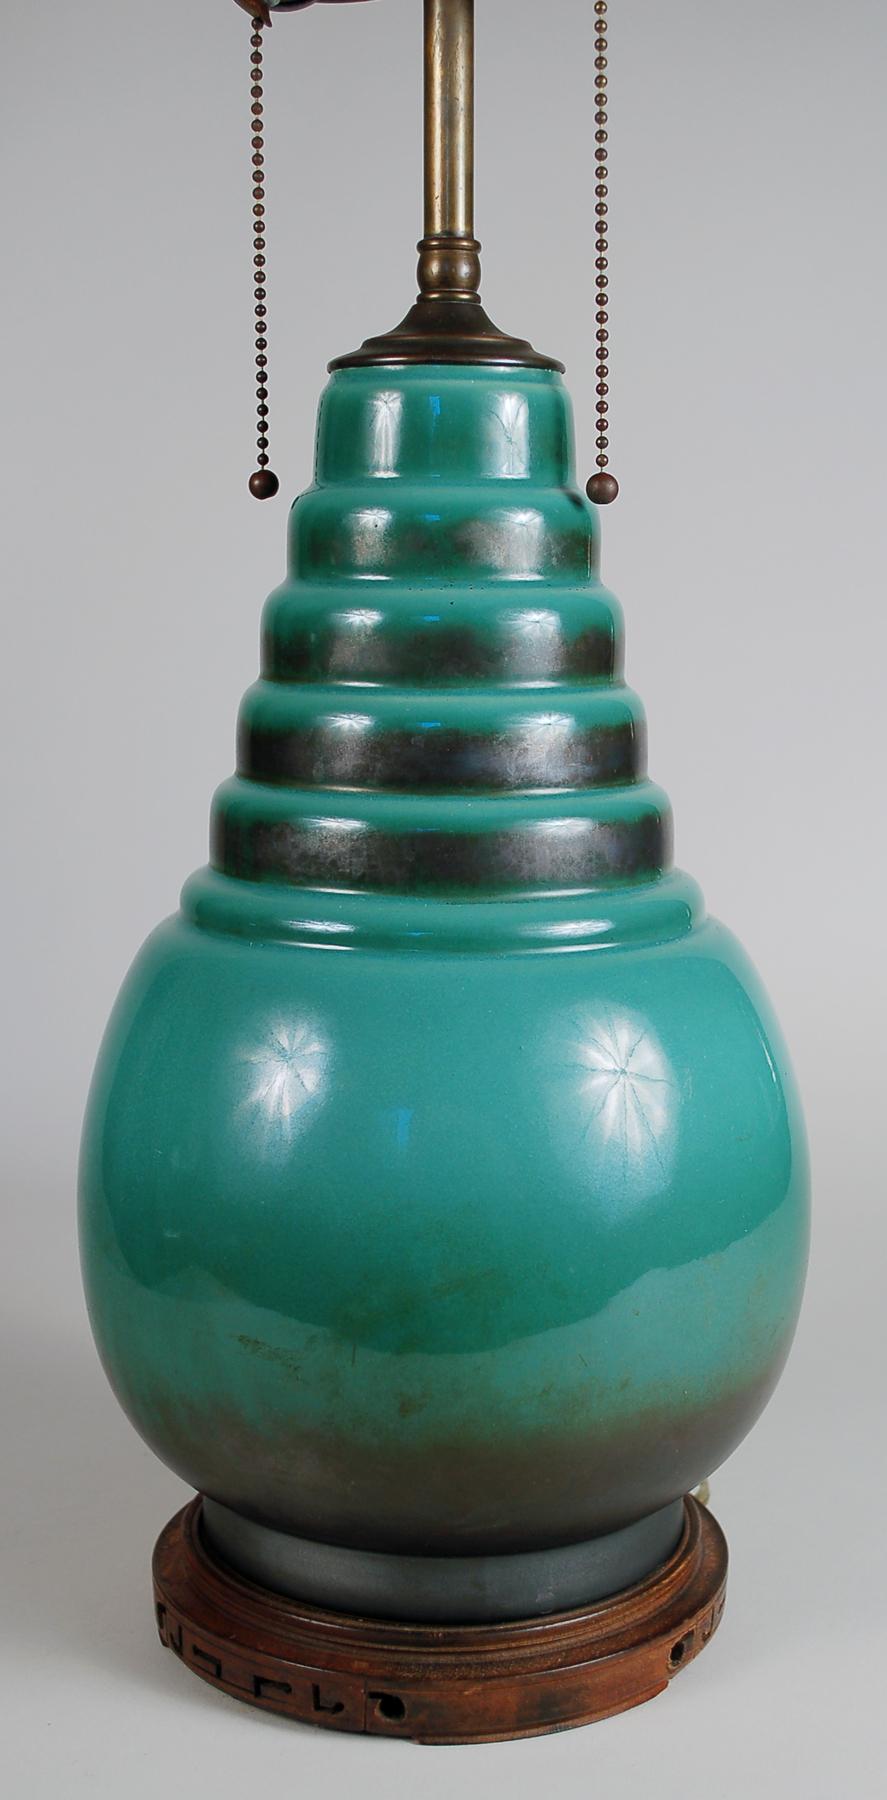 Roseville Pottery bomb vase from their Art Deco Futura line as a table lamp. This lamp is a period piece. We have seen other examples but it is not known if these were done by the Roseville Pottery or another company converted them into lamps.